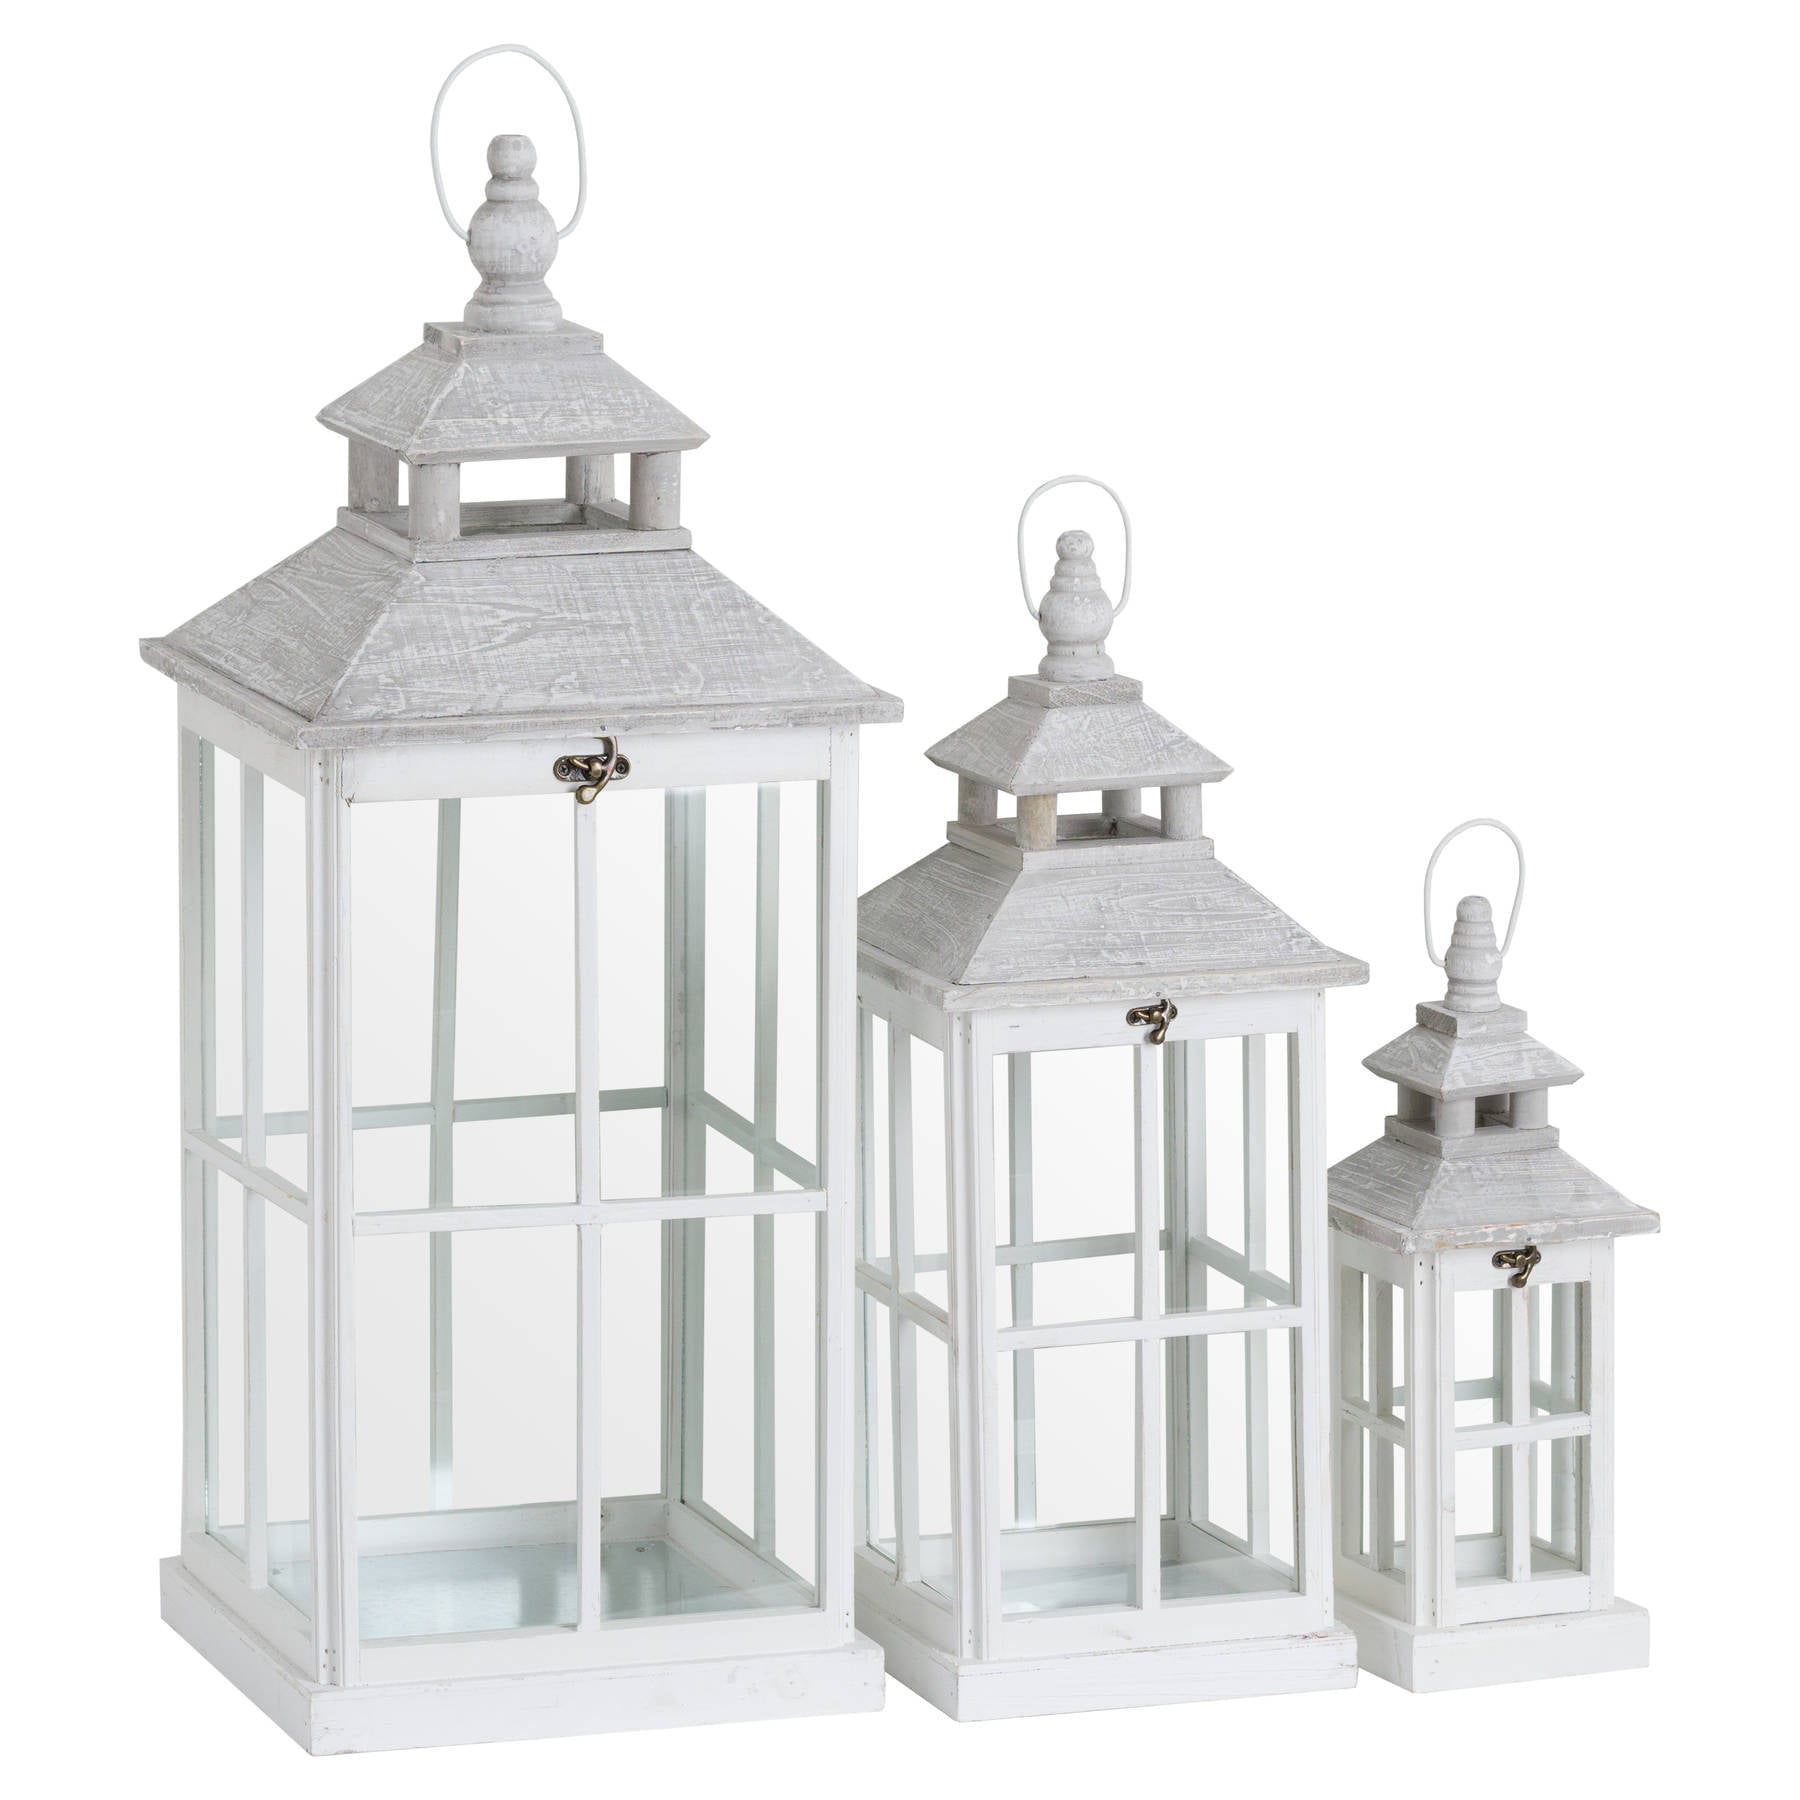 View Set Of 3 White Window Style Lanterns With Open Top information